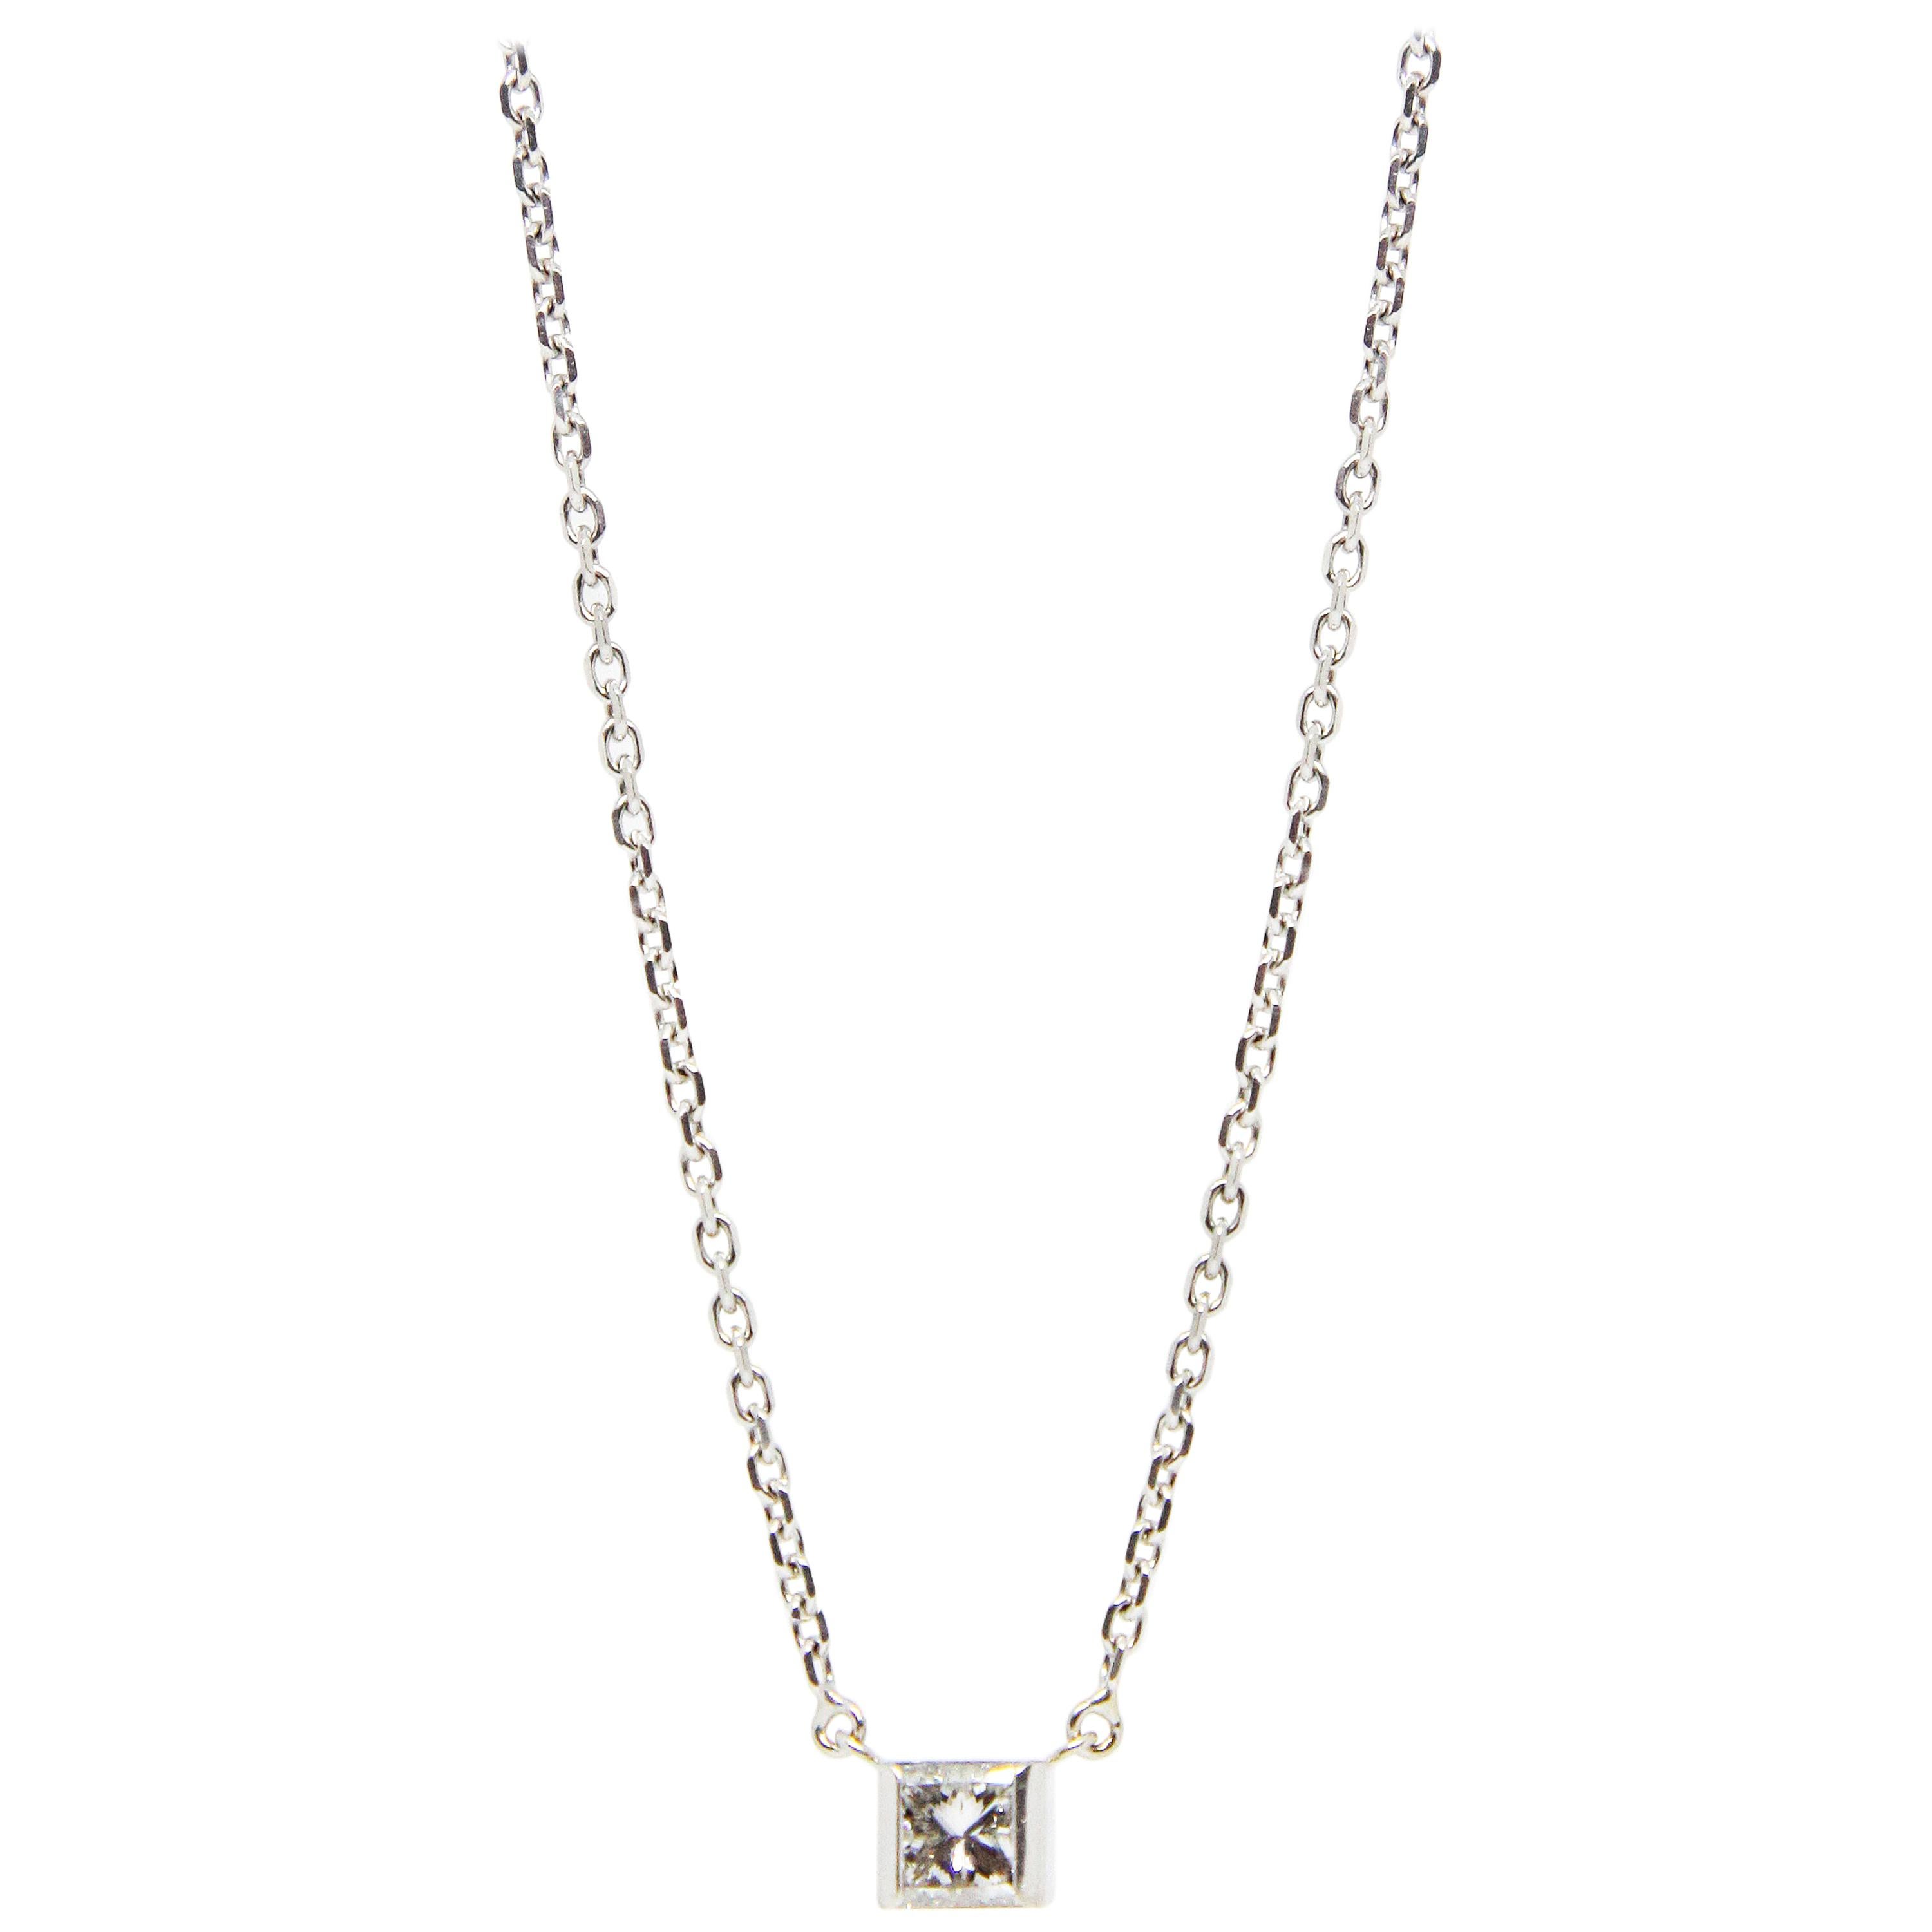 Stunning CARTIER Solitaire Diamond and White Gold Chain Necklace